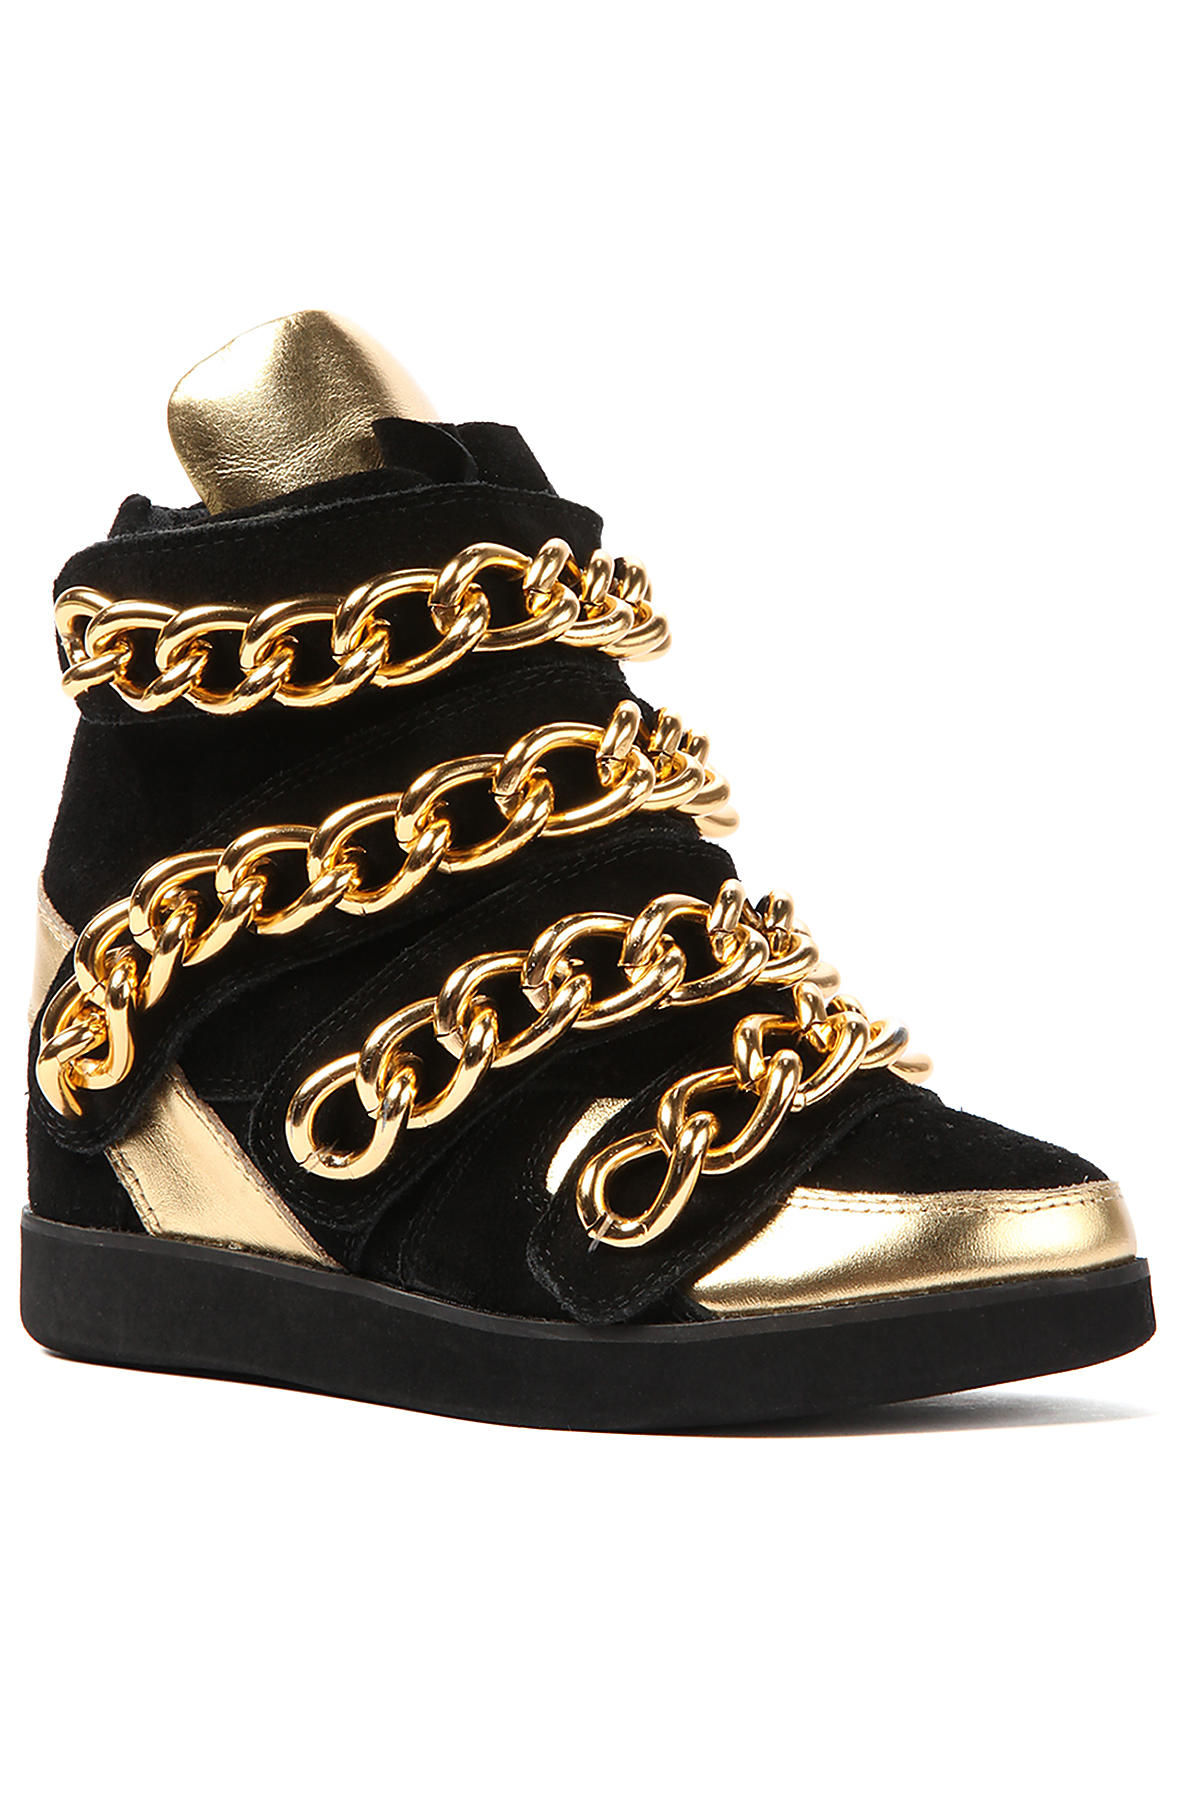 Ti år sten Definition JEFFREY CAMPBELL The Almost Chain Sneaker in Suede and Gold ALMOST-CHAIN-BLK-GLD  - Shiekh